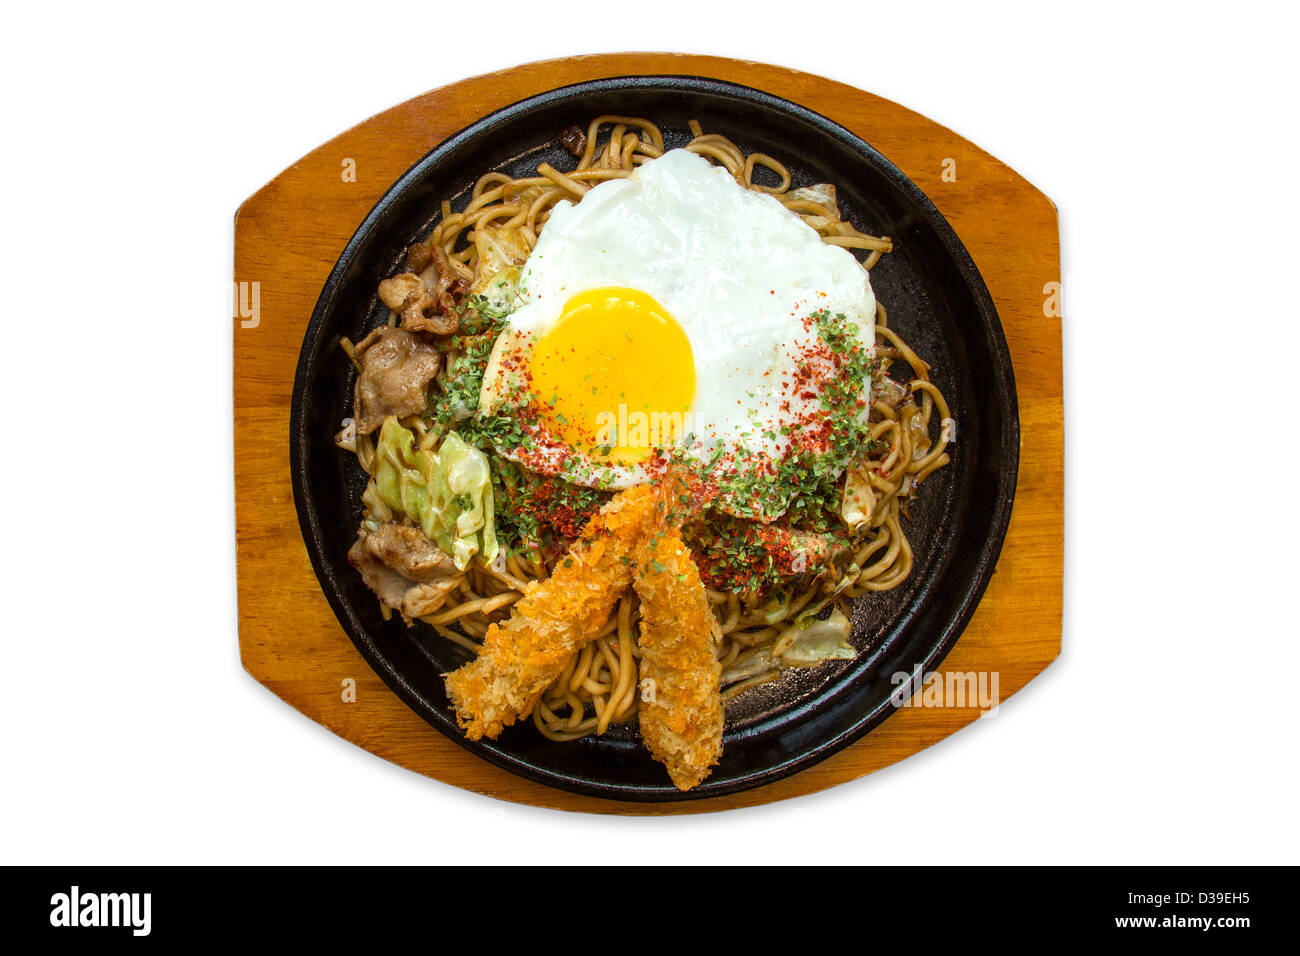 Japanese traditional stir noodles with prawn and pork Stock Photo